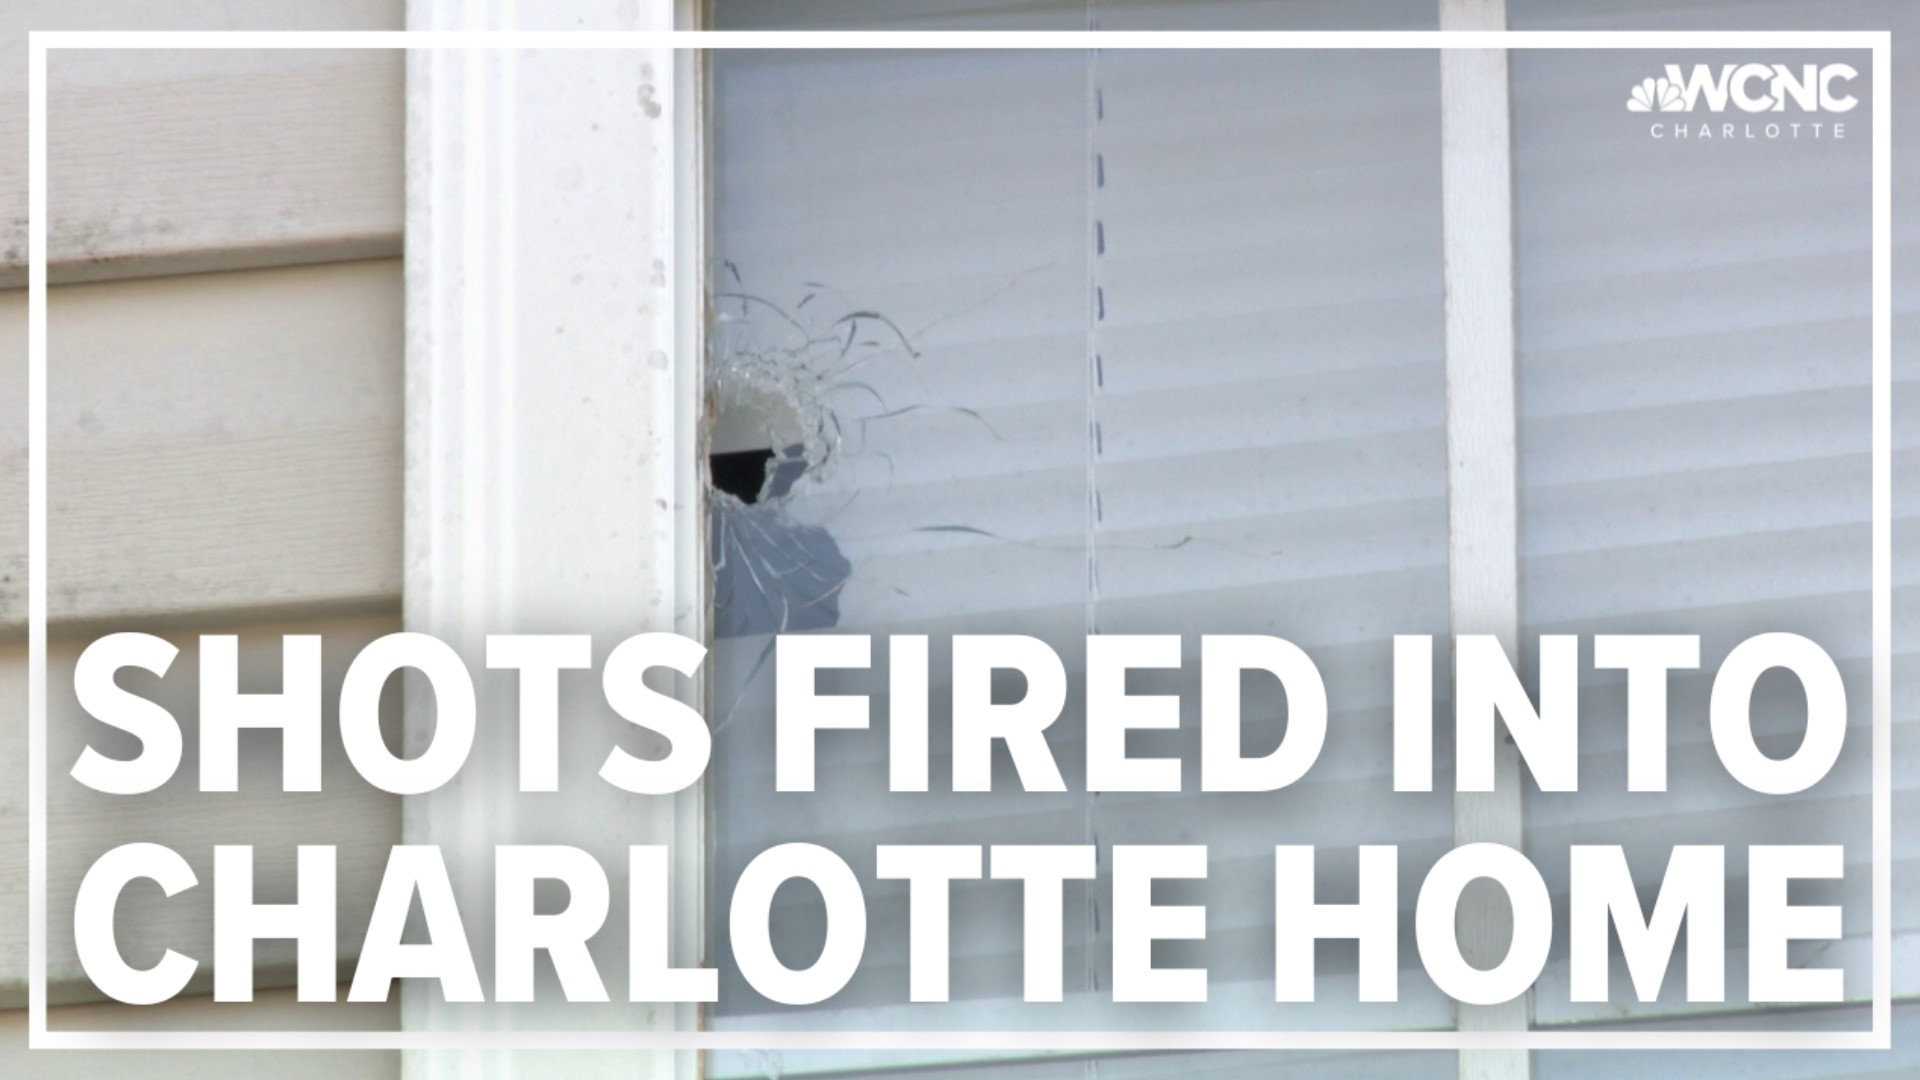 At least 20 shots were fired into a northwest Charlotte home when three kids were asleep inside.